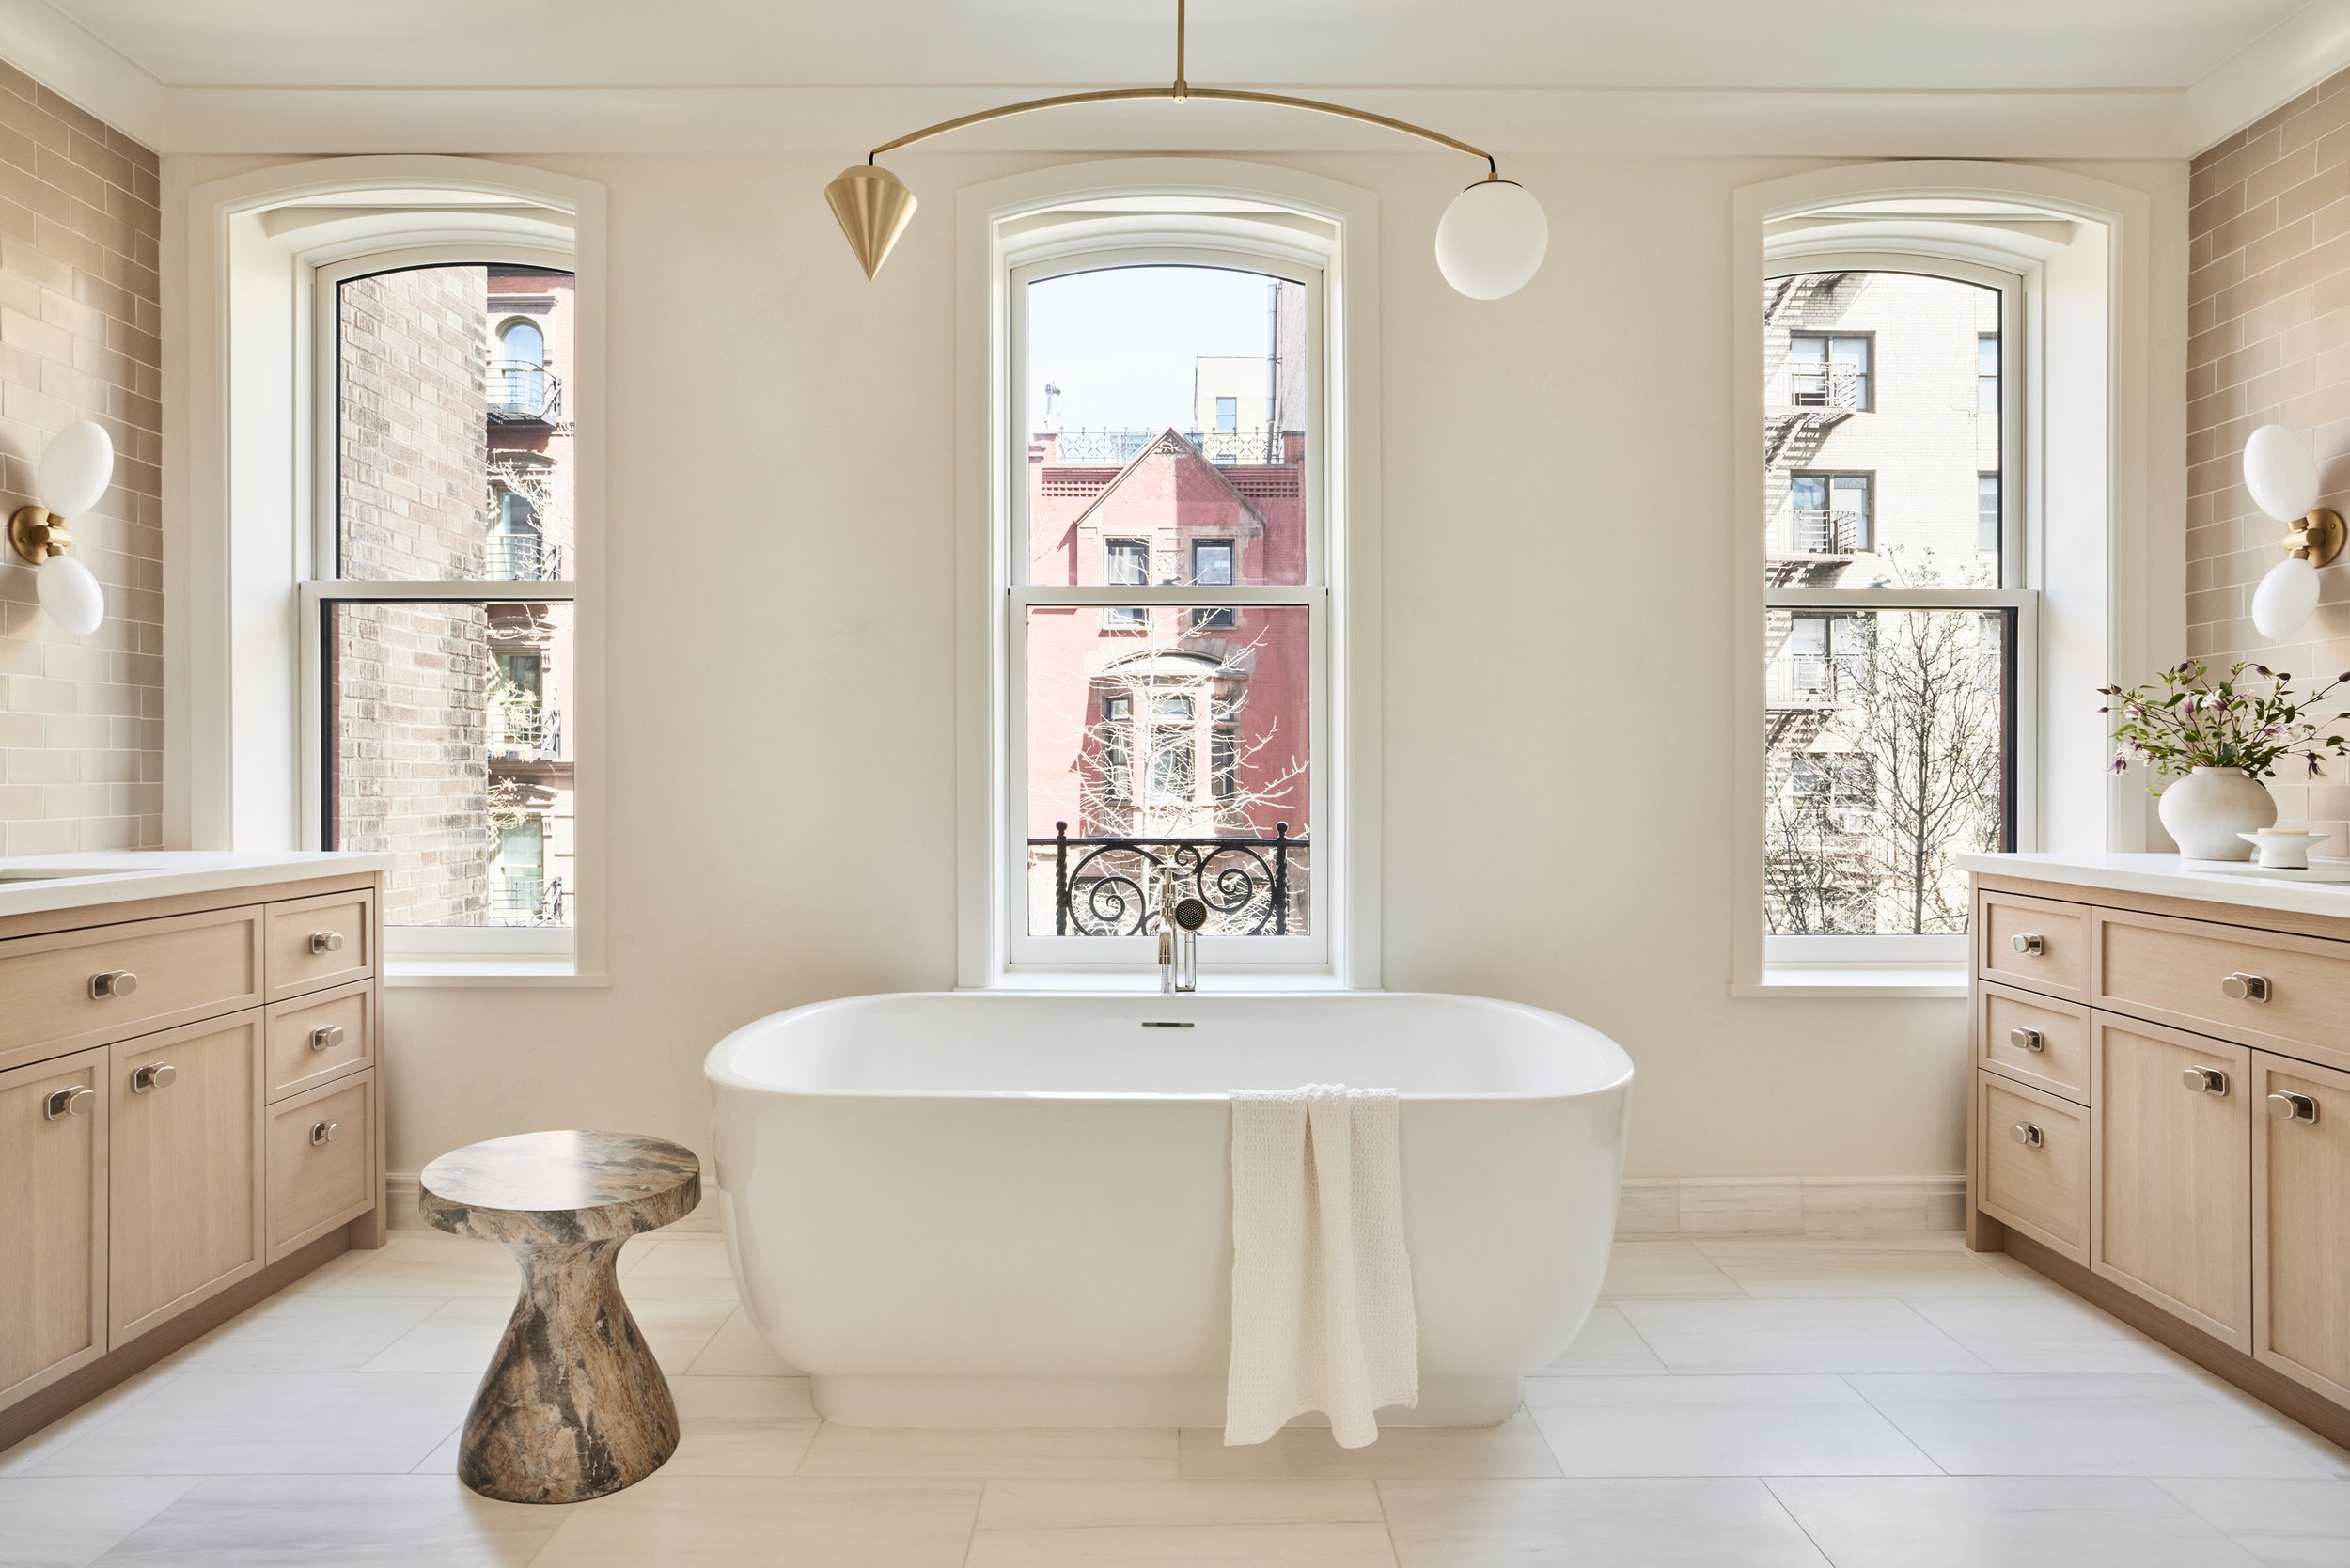 Ready To Relax? 7 Bath Accessories for the Best Bath Ever! - I Spy